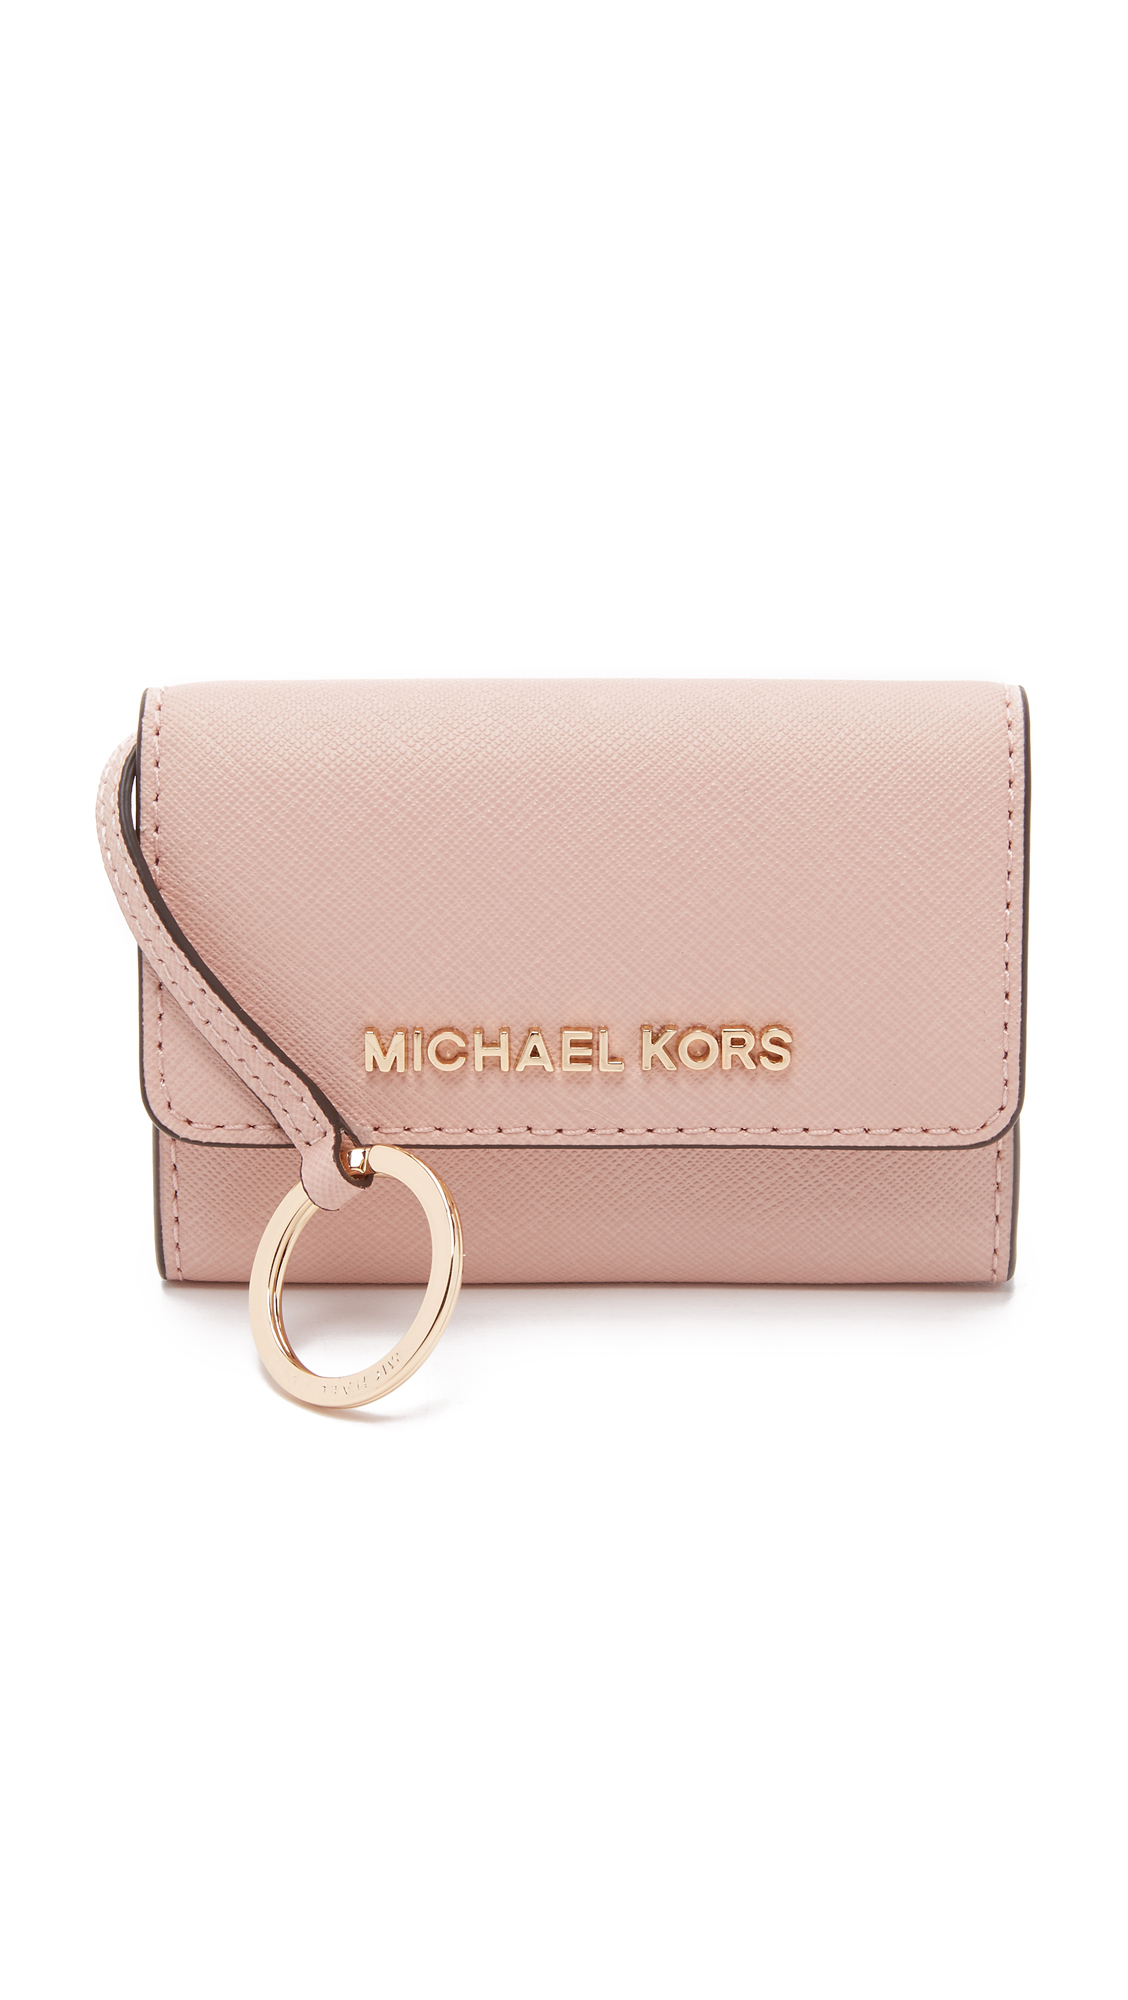 Lyst - Michael Michael Kors Jet Set Coin Purse in Pink